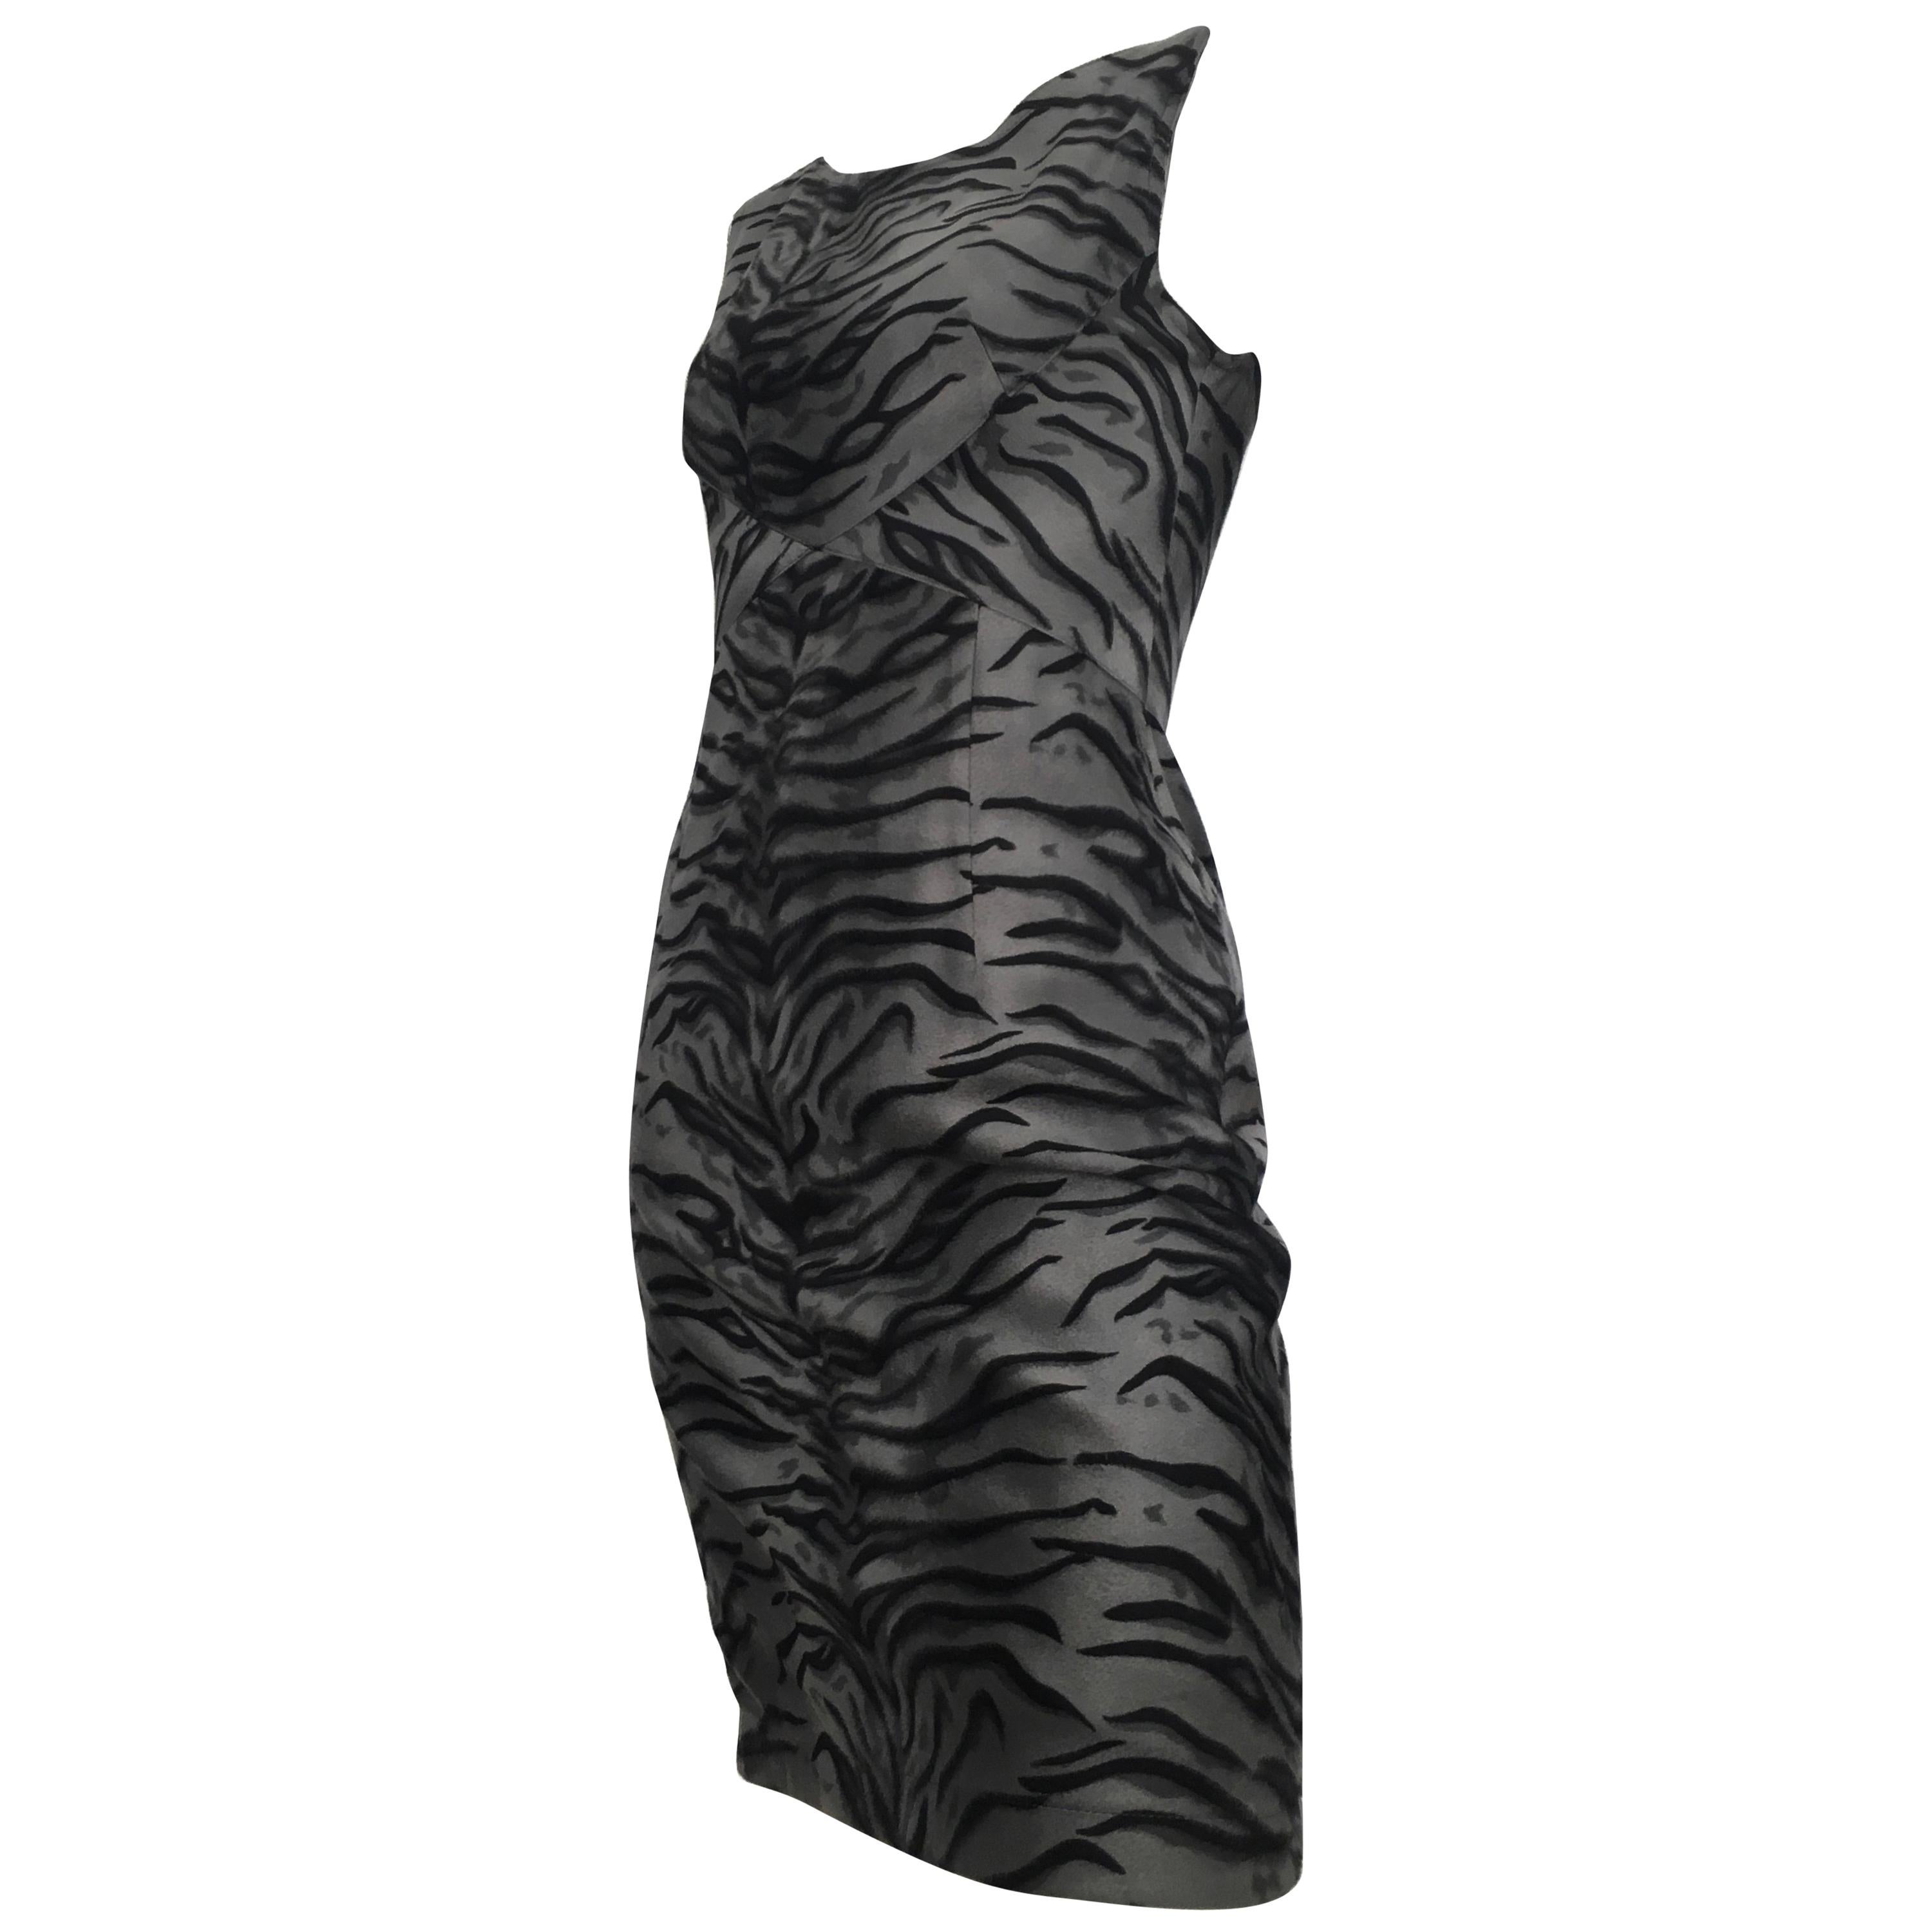 Moschino Gray Tiger Print Sleeveless Dress Size 4. For Sale